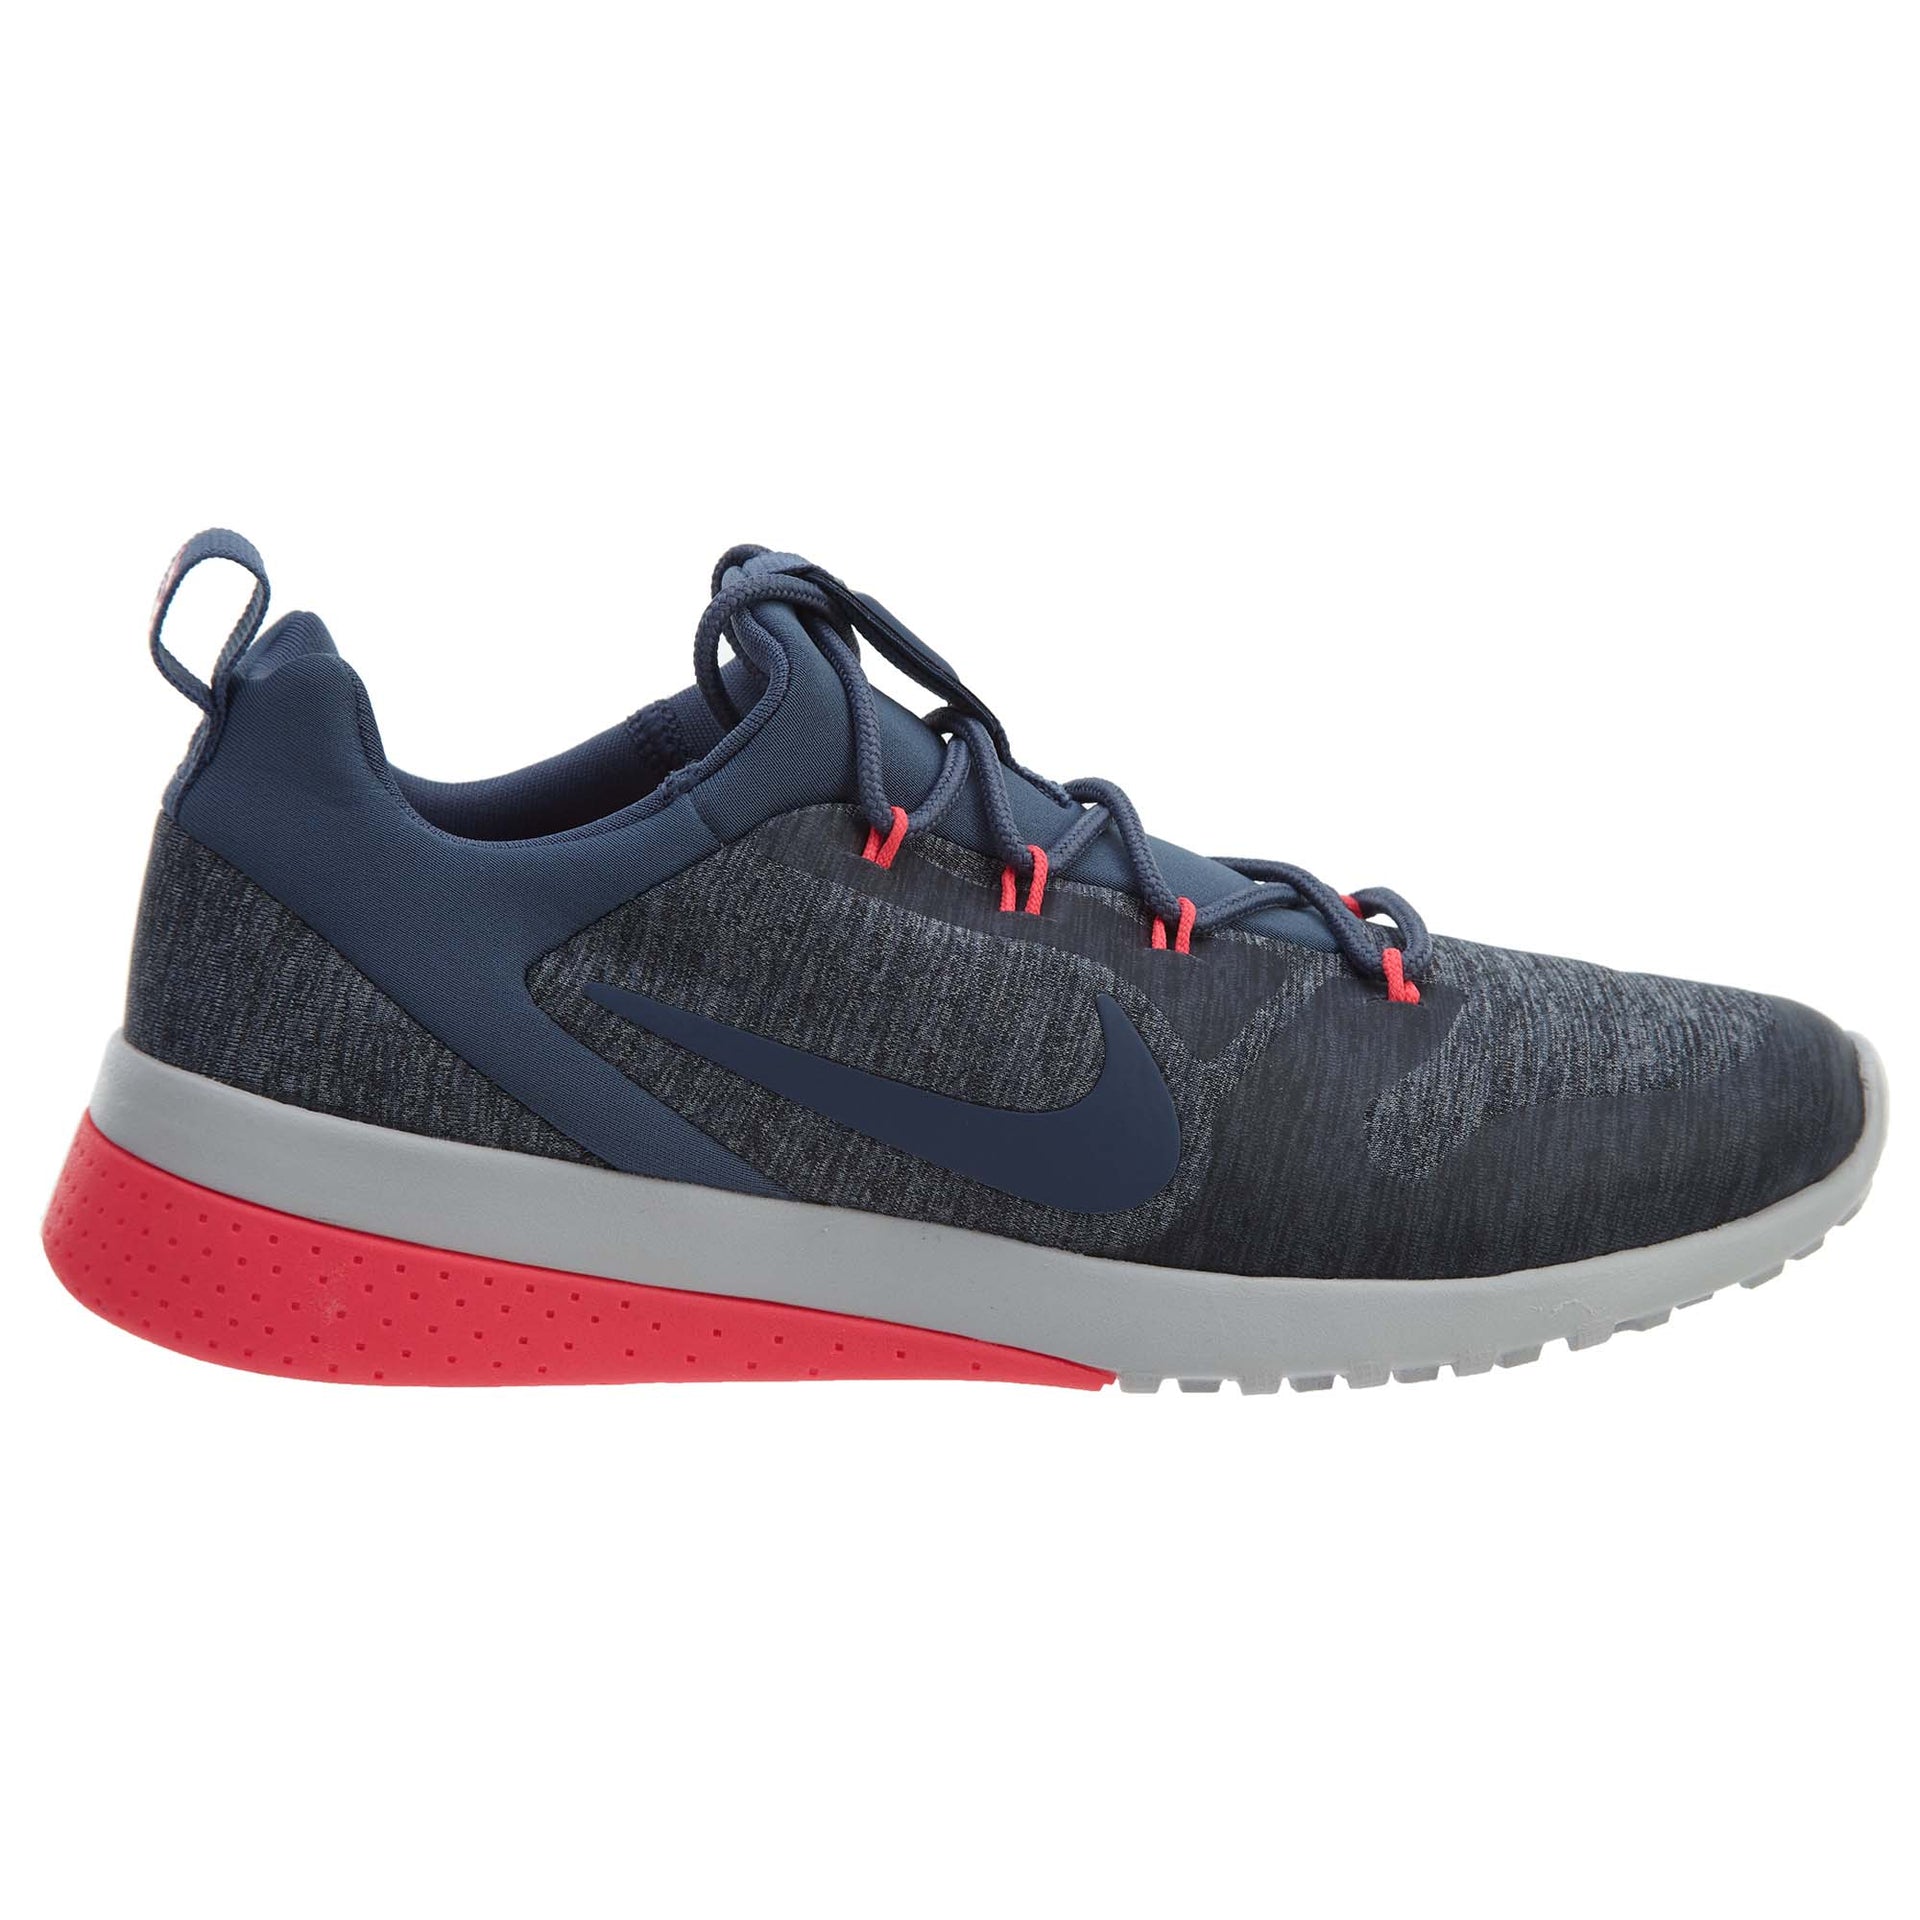 Nike Ck Racer Diffused Blue Diffused Blue (Women's)